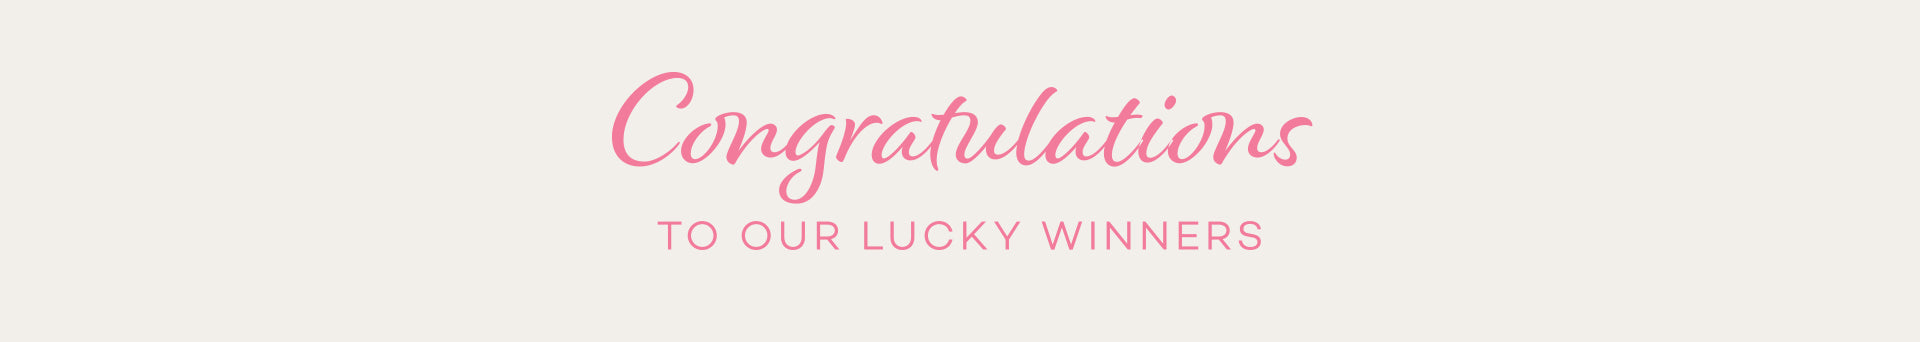 Congratulations to our lucky winners